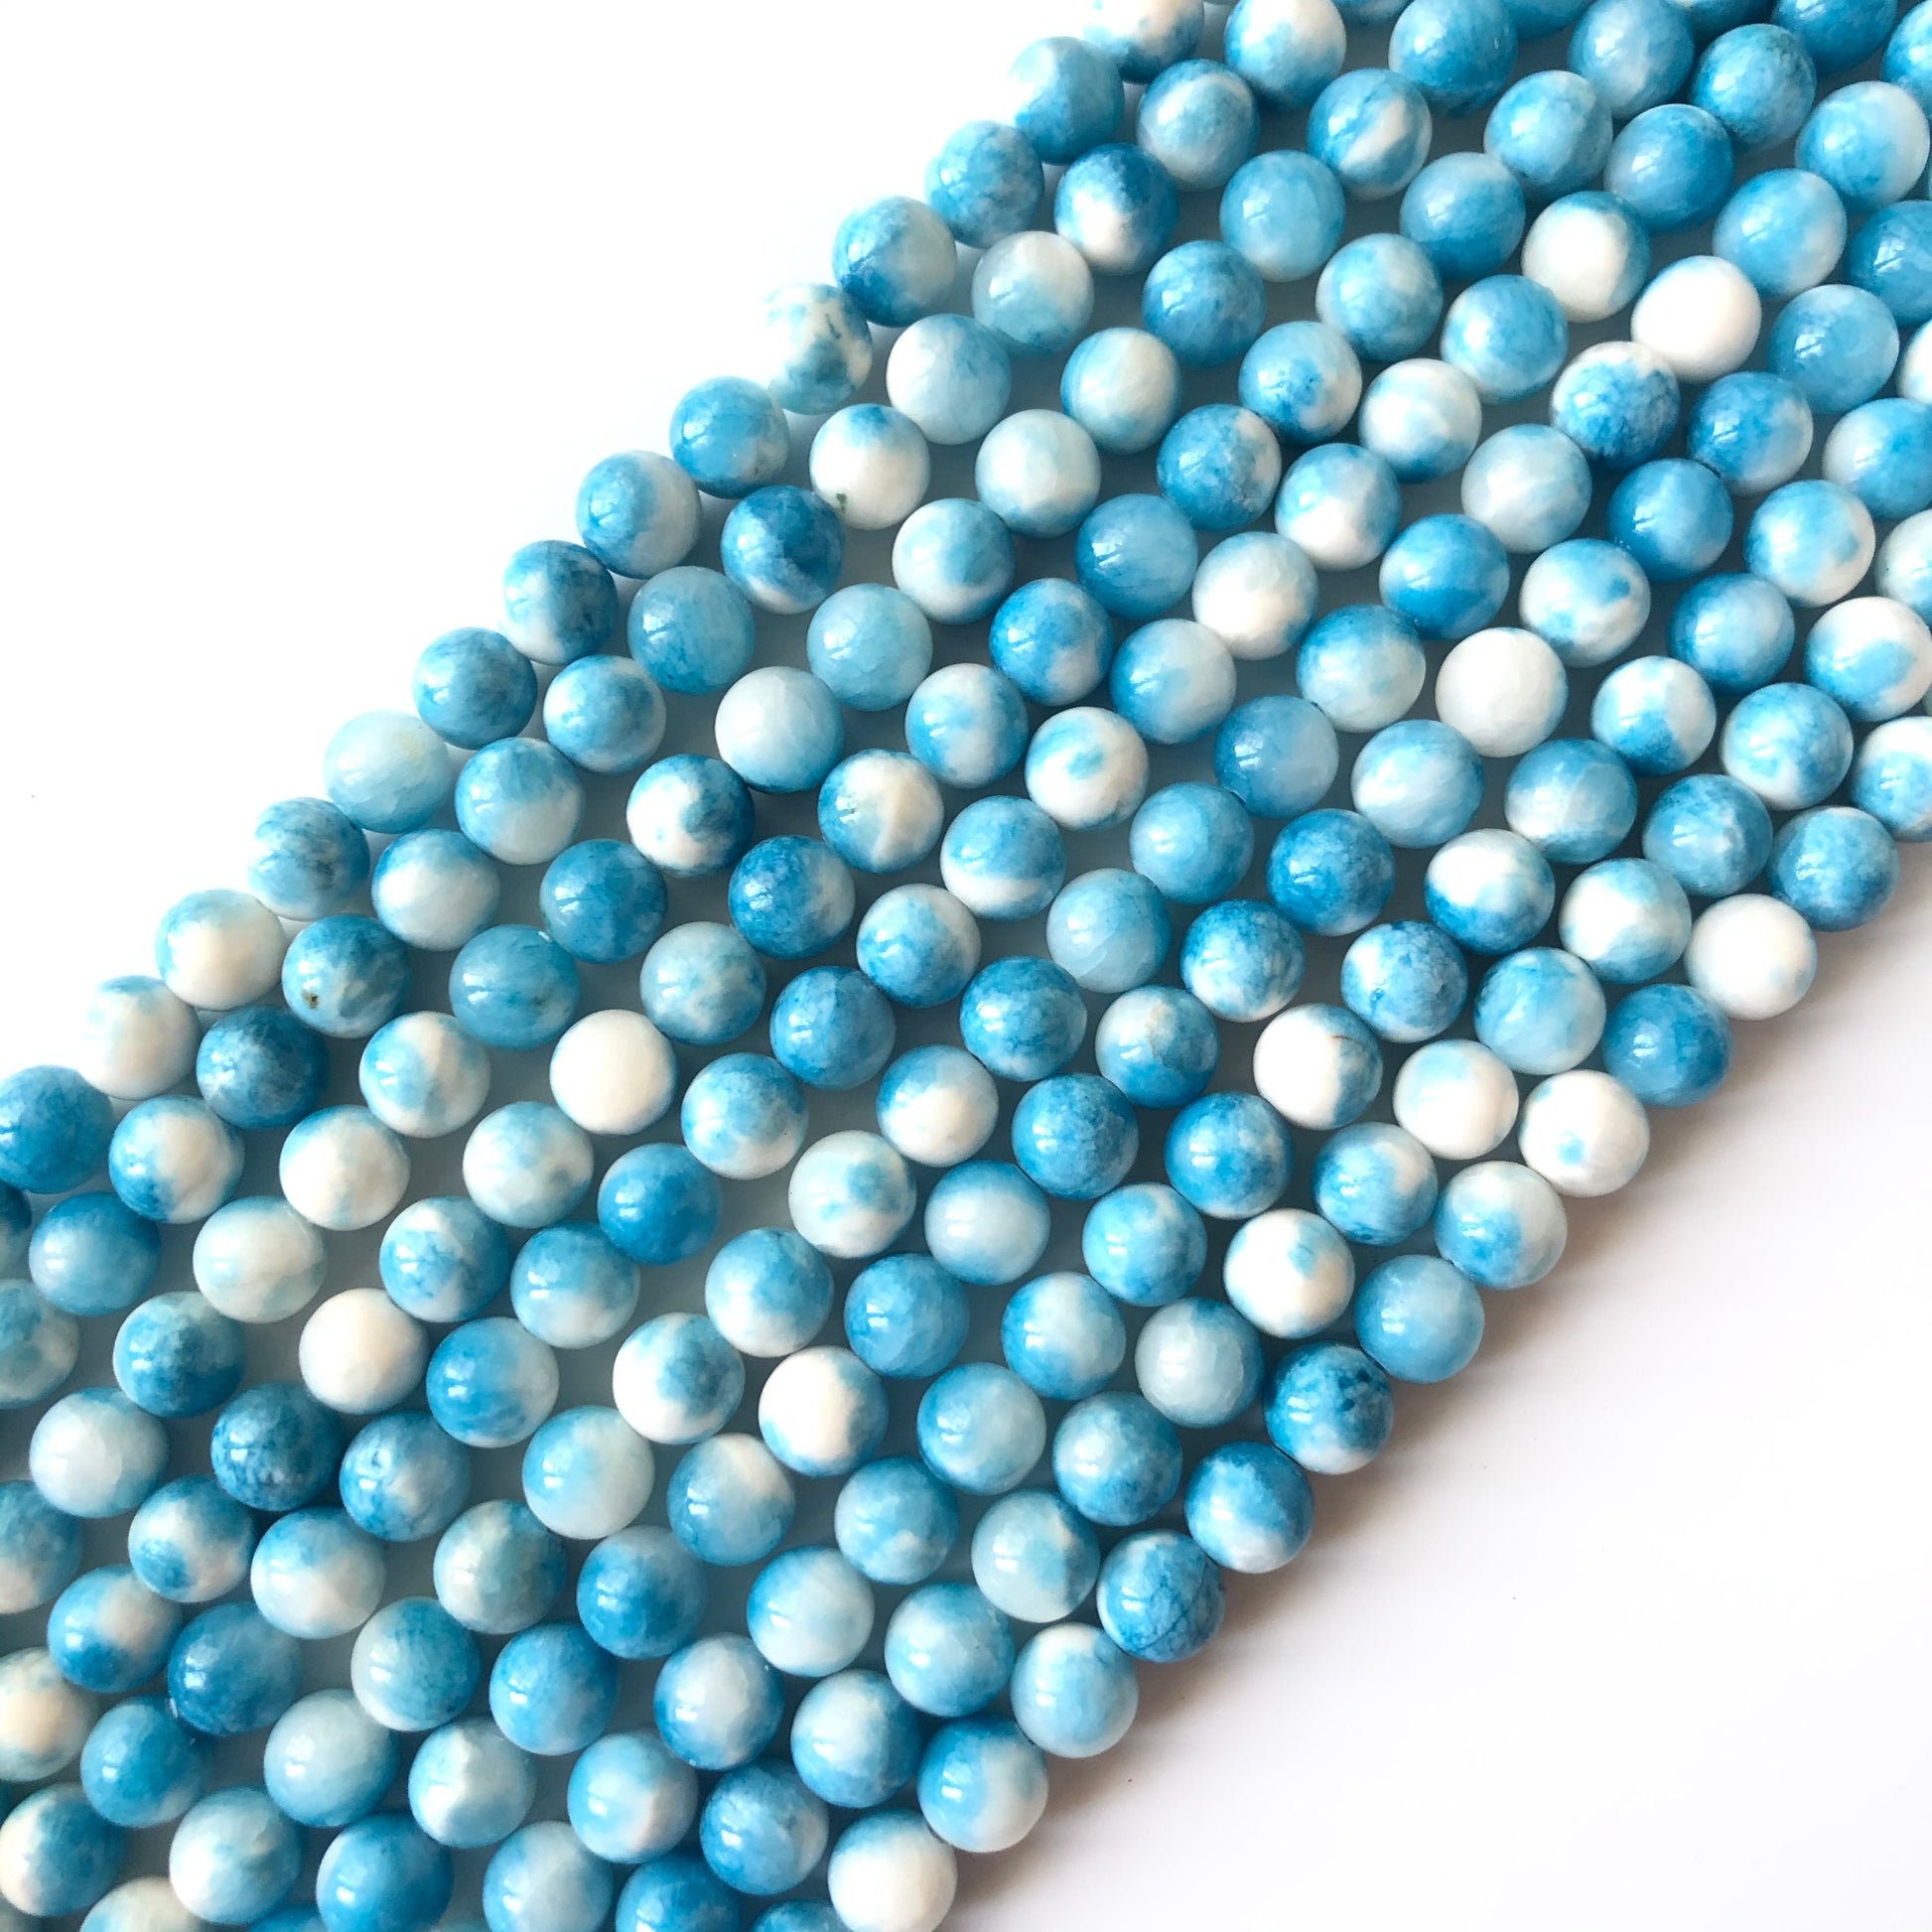 2 Strands/lot 8mm, 10mm Natural Light Blue White Persian Jade Round Stone Beads Stone Beads 8mm Stone Beads Persian Jade Beads Round Jade Beads Charms Beads Beyond